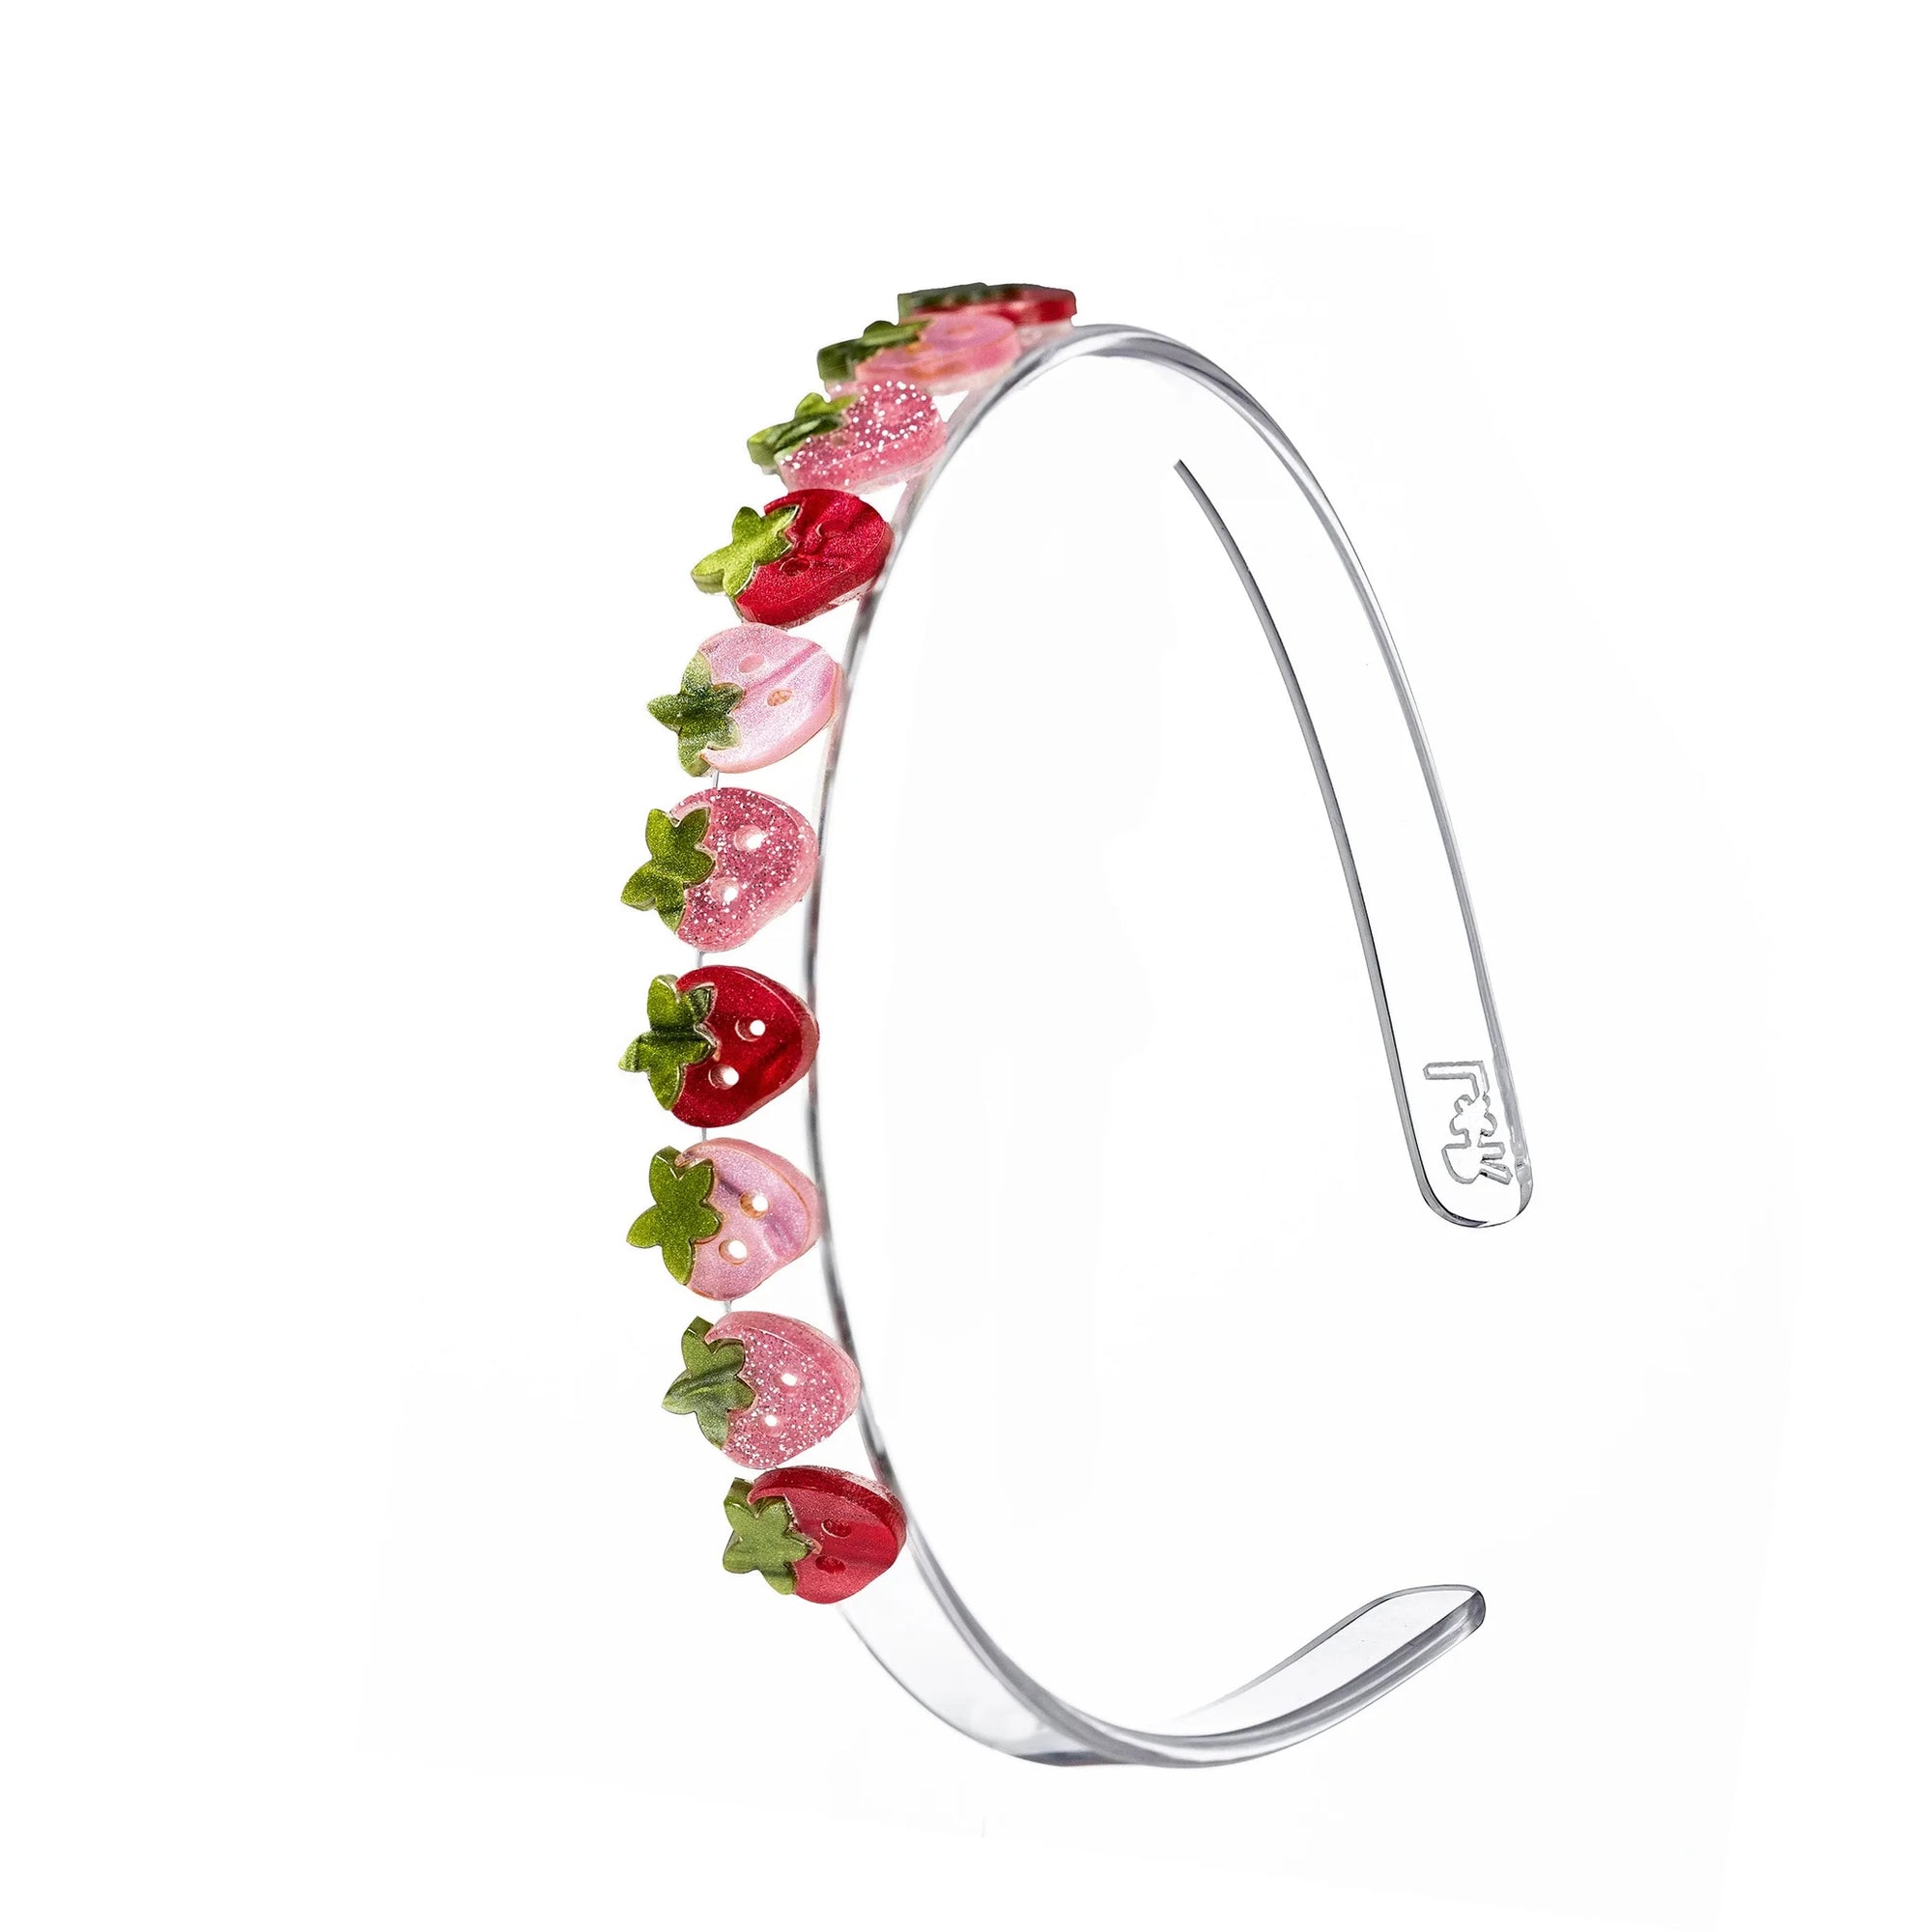 Lilies & Roses: Multi Strawberry Pearlized Headband